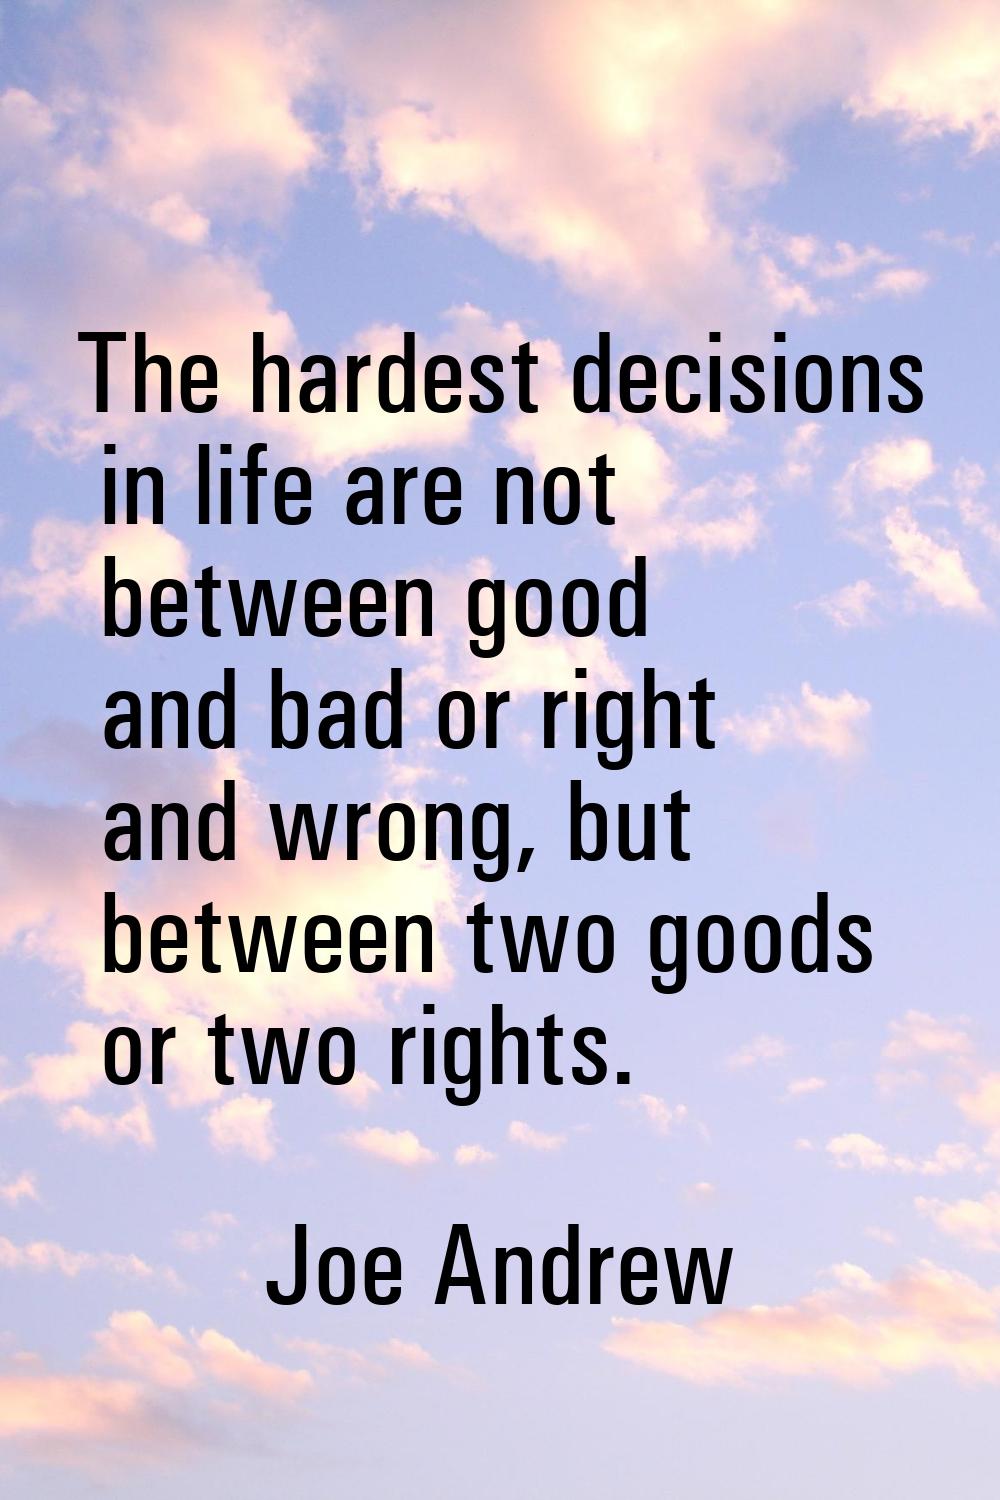 The hardest decisions in life are not between good and bad or right and wrong, but between two good